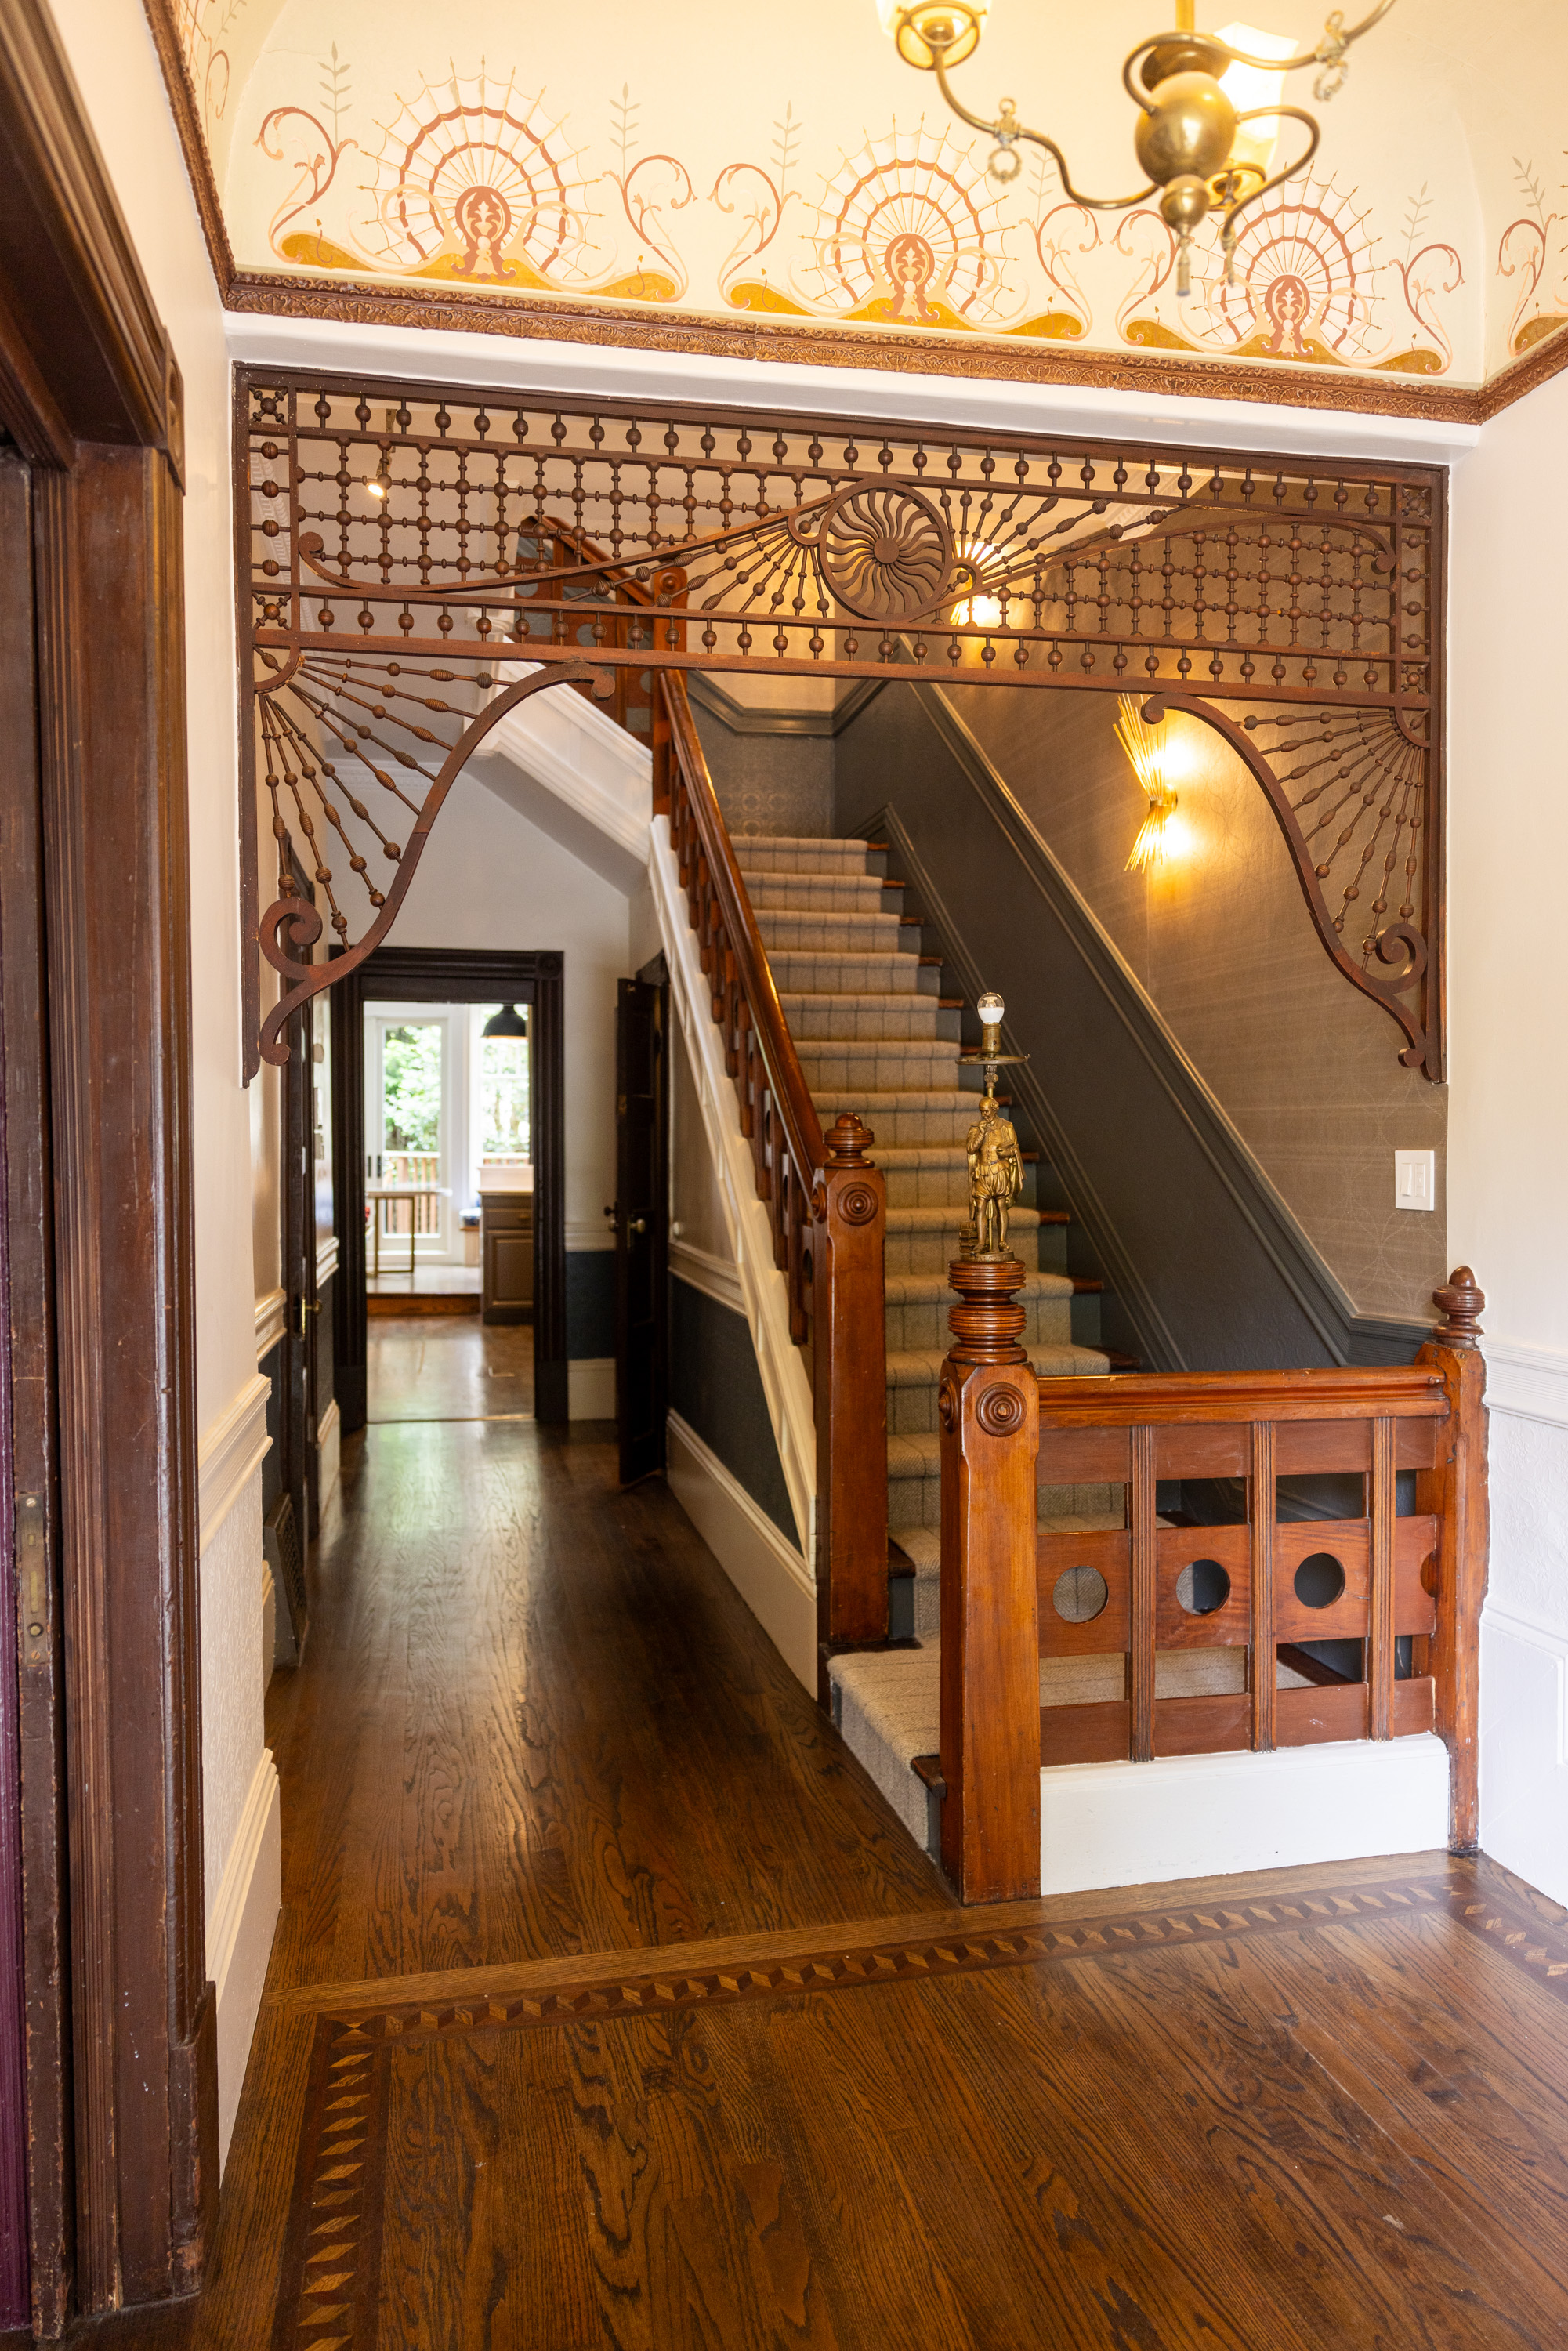 The image shows an ornate, narrow hallway featuring a wooden staircase with detailed railings and newel posts, with patterned wallpaper and decorative stenciling on the walls.